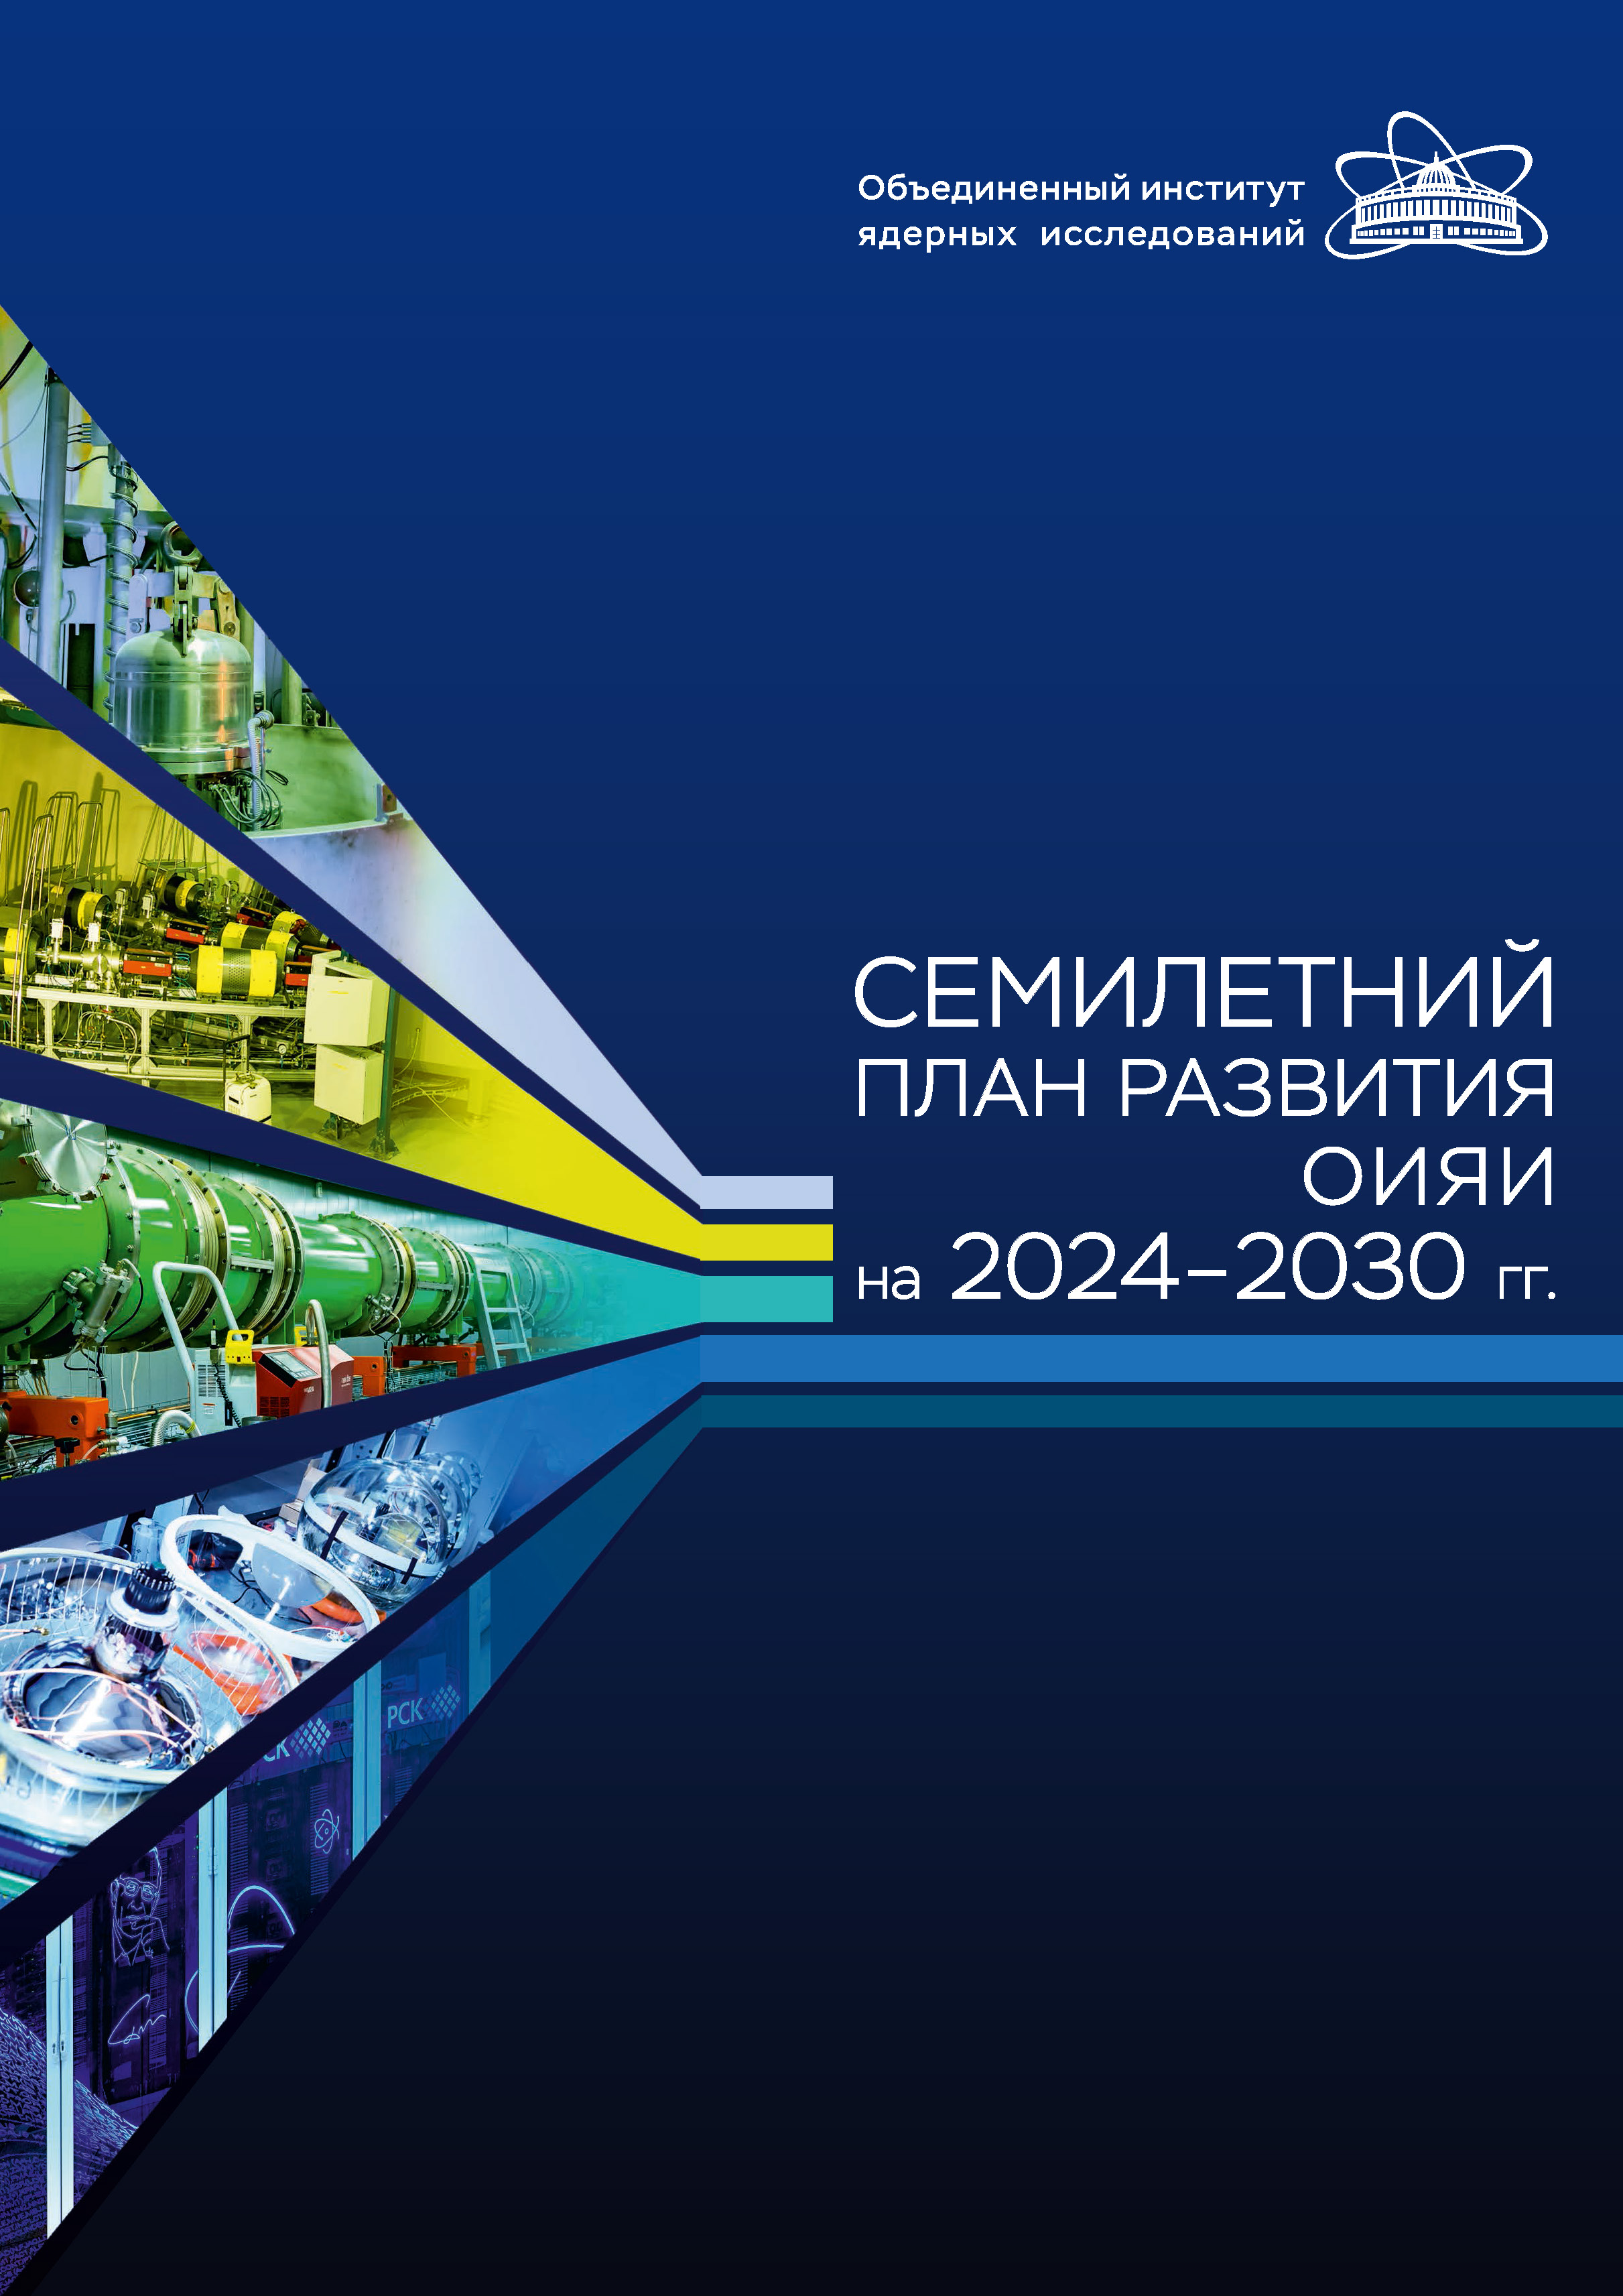 Seven-Year Plan for the Development of JINR for 2024–2030